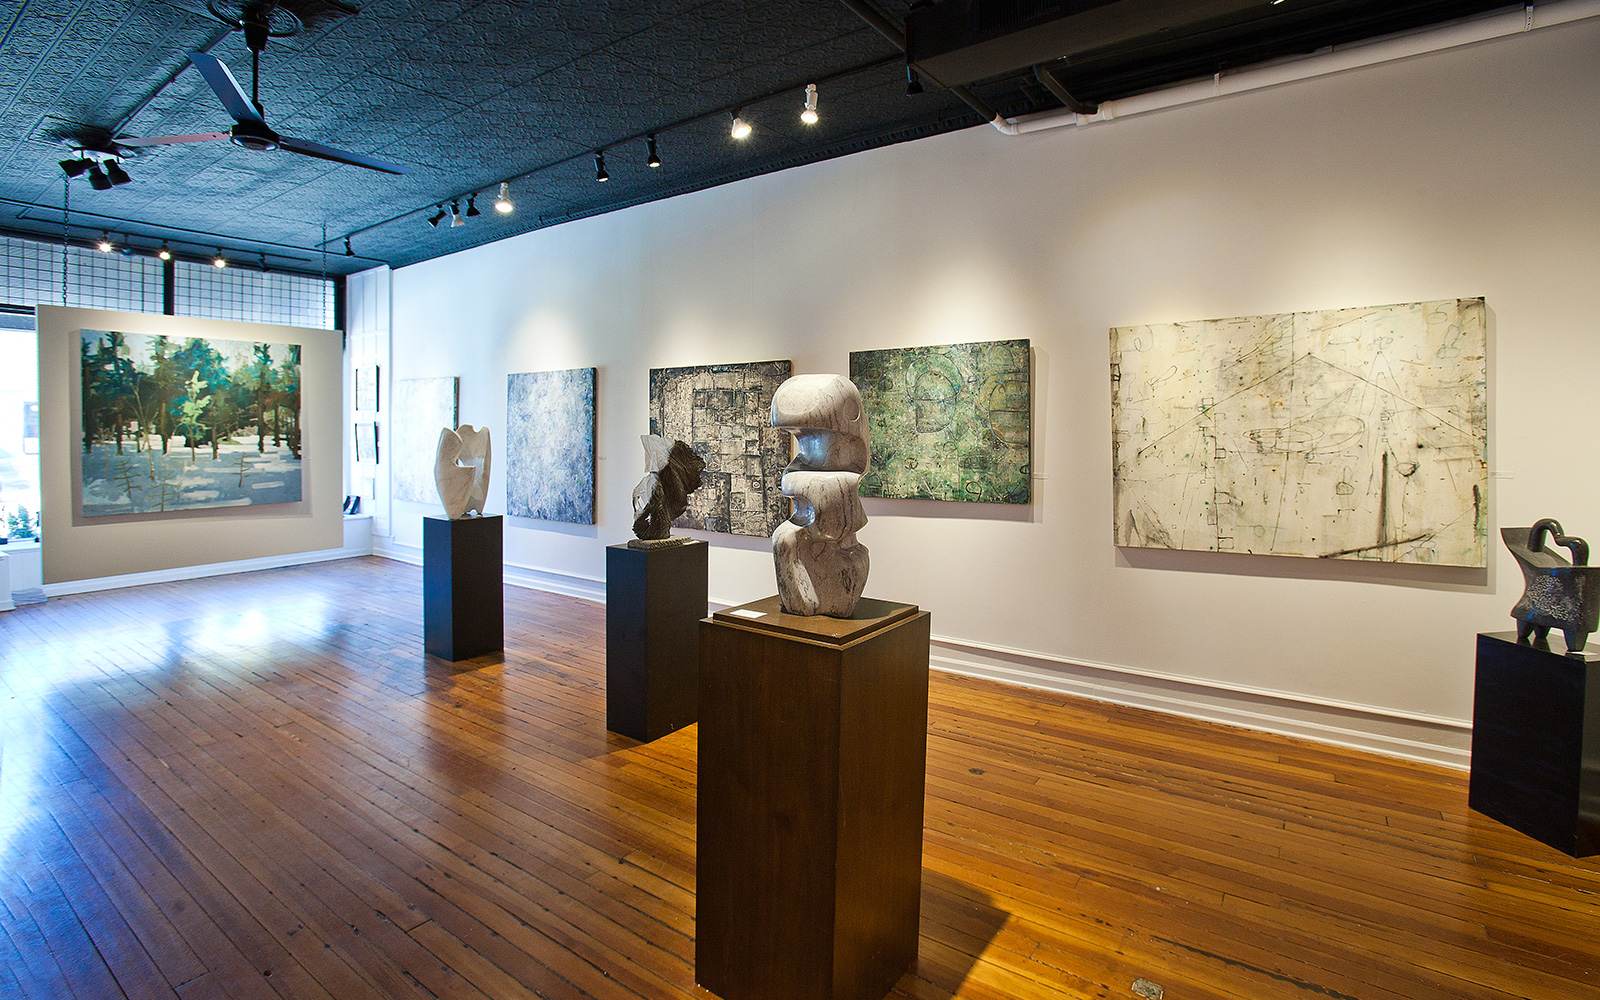 art gallery with sculptures displayed on wood pedestals and abstract green and nuetral-colored paintings adorn the walls